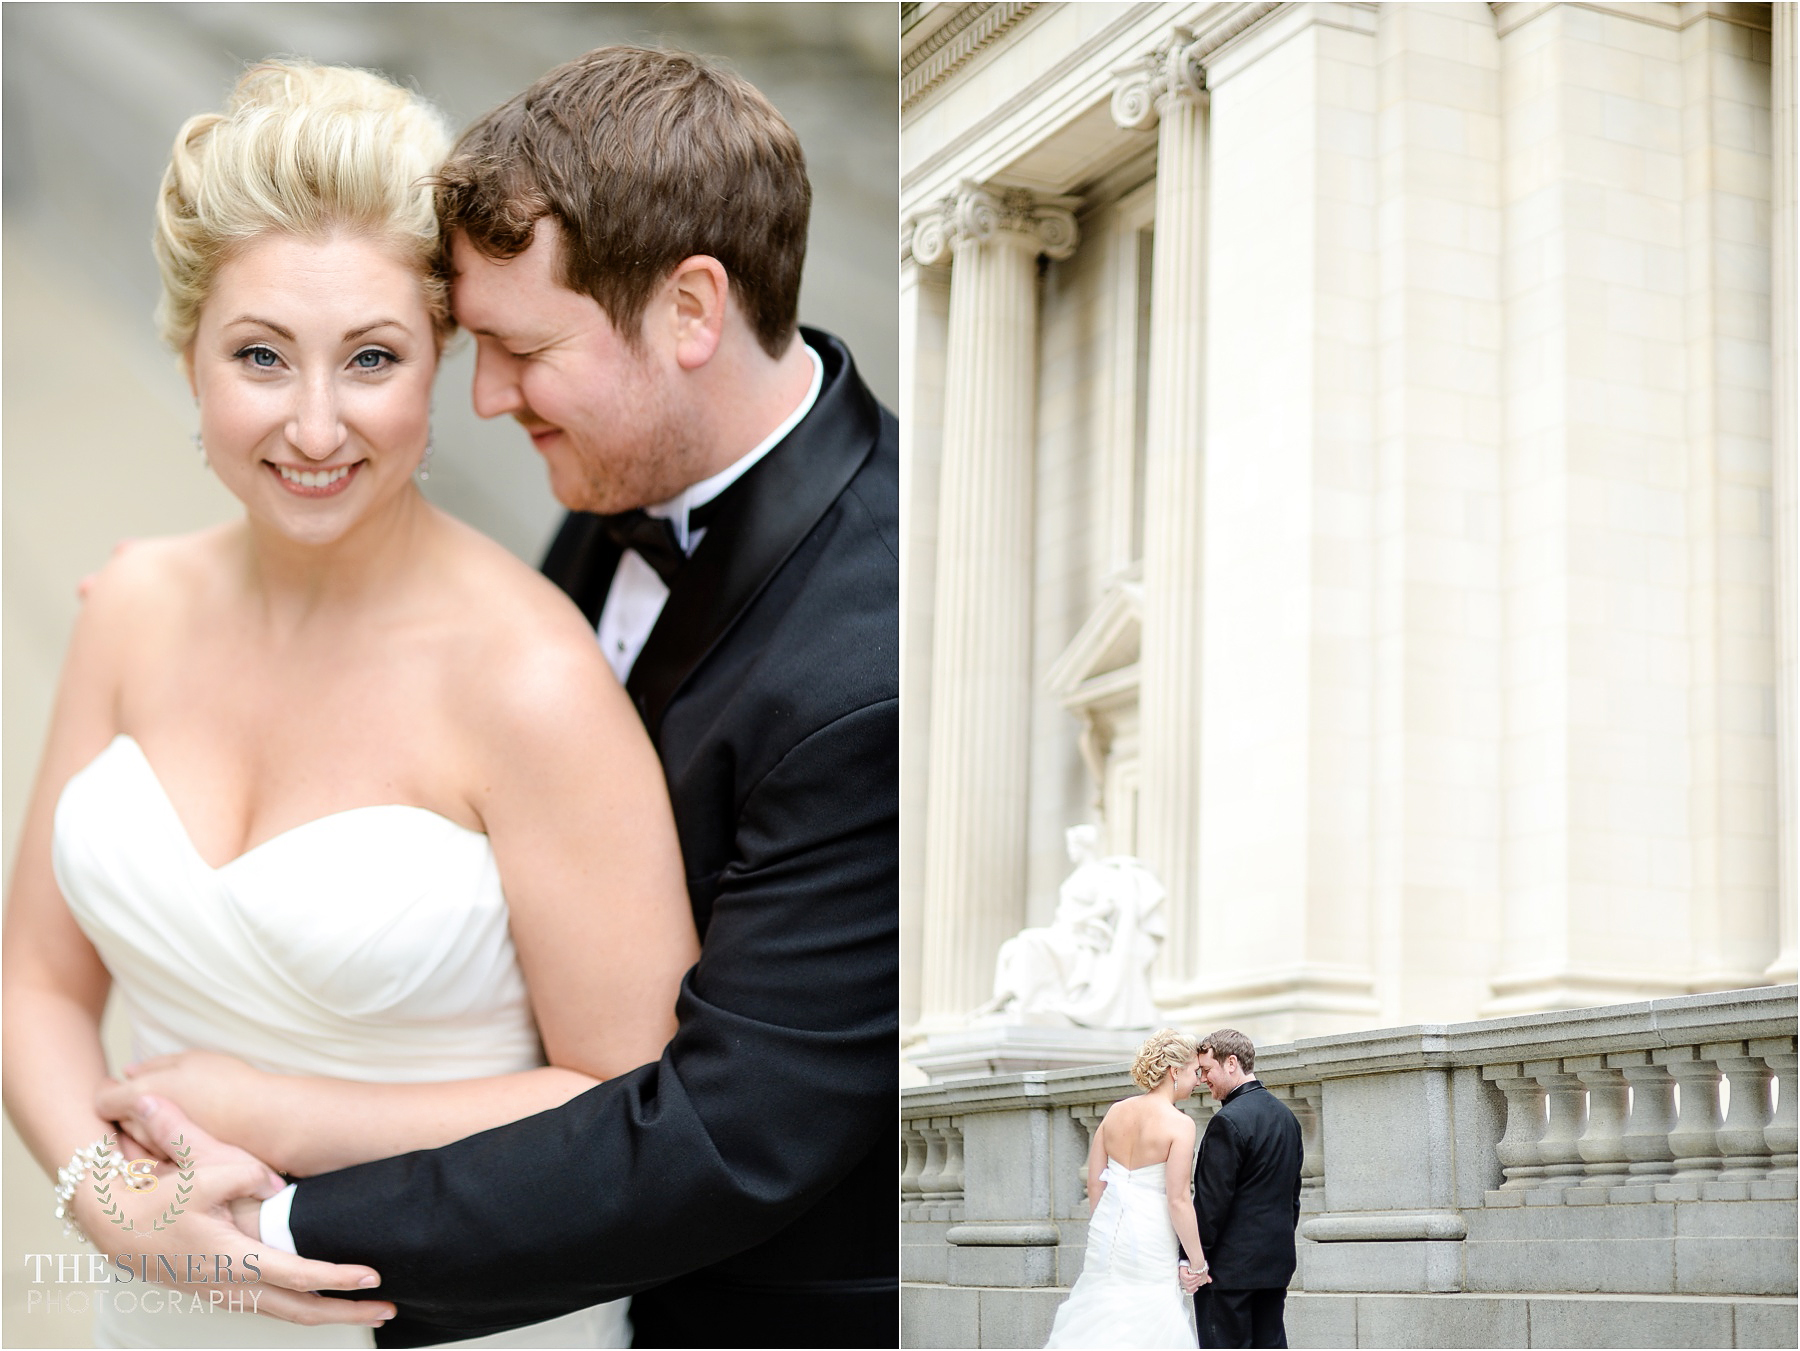 Year Review_B&G_Indianapolis Wedding Photographer_TheSinersPhotography_0005